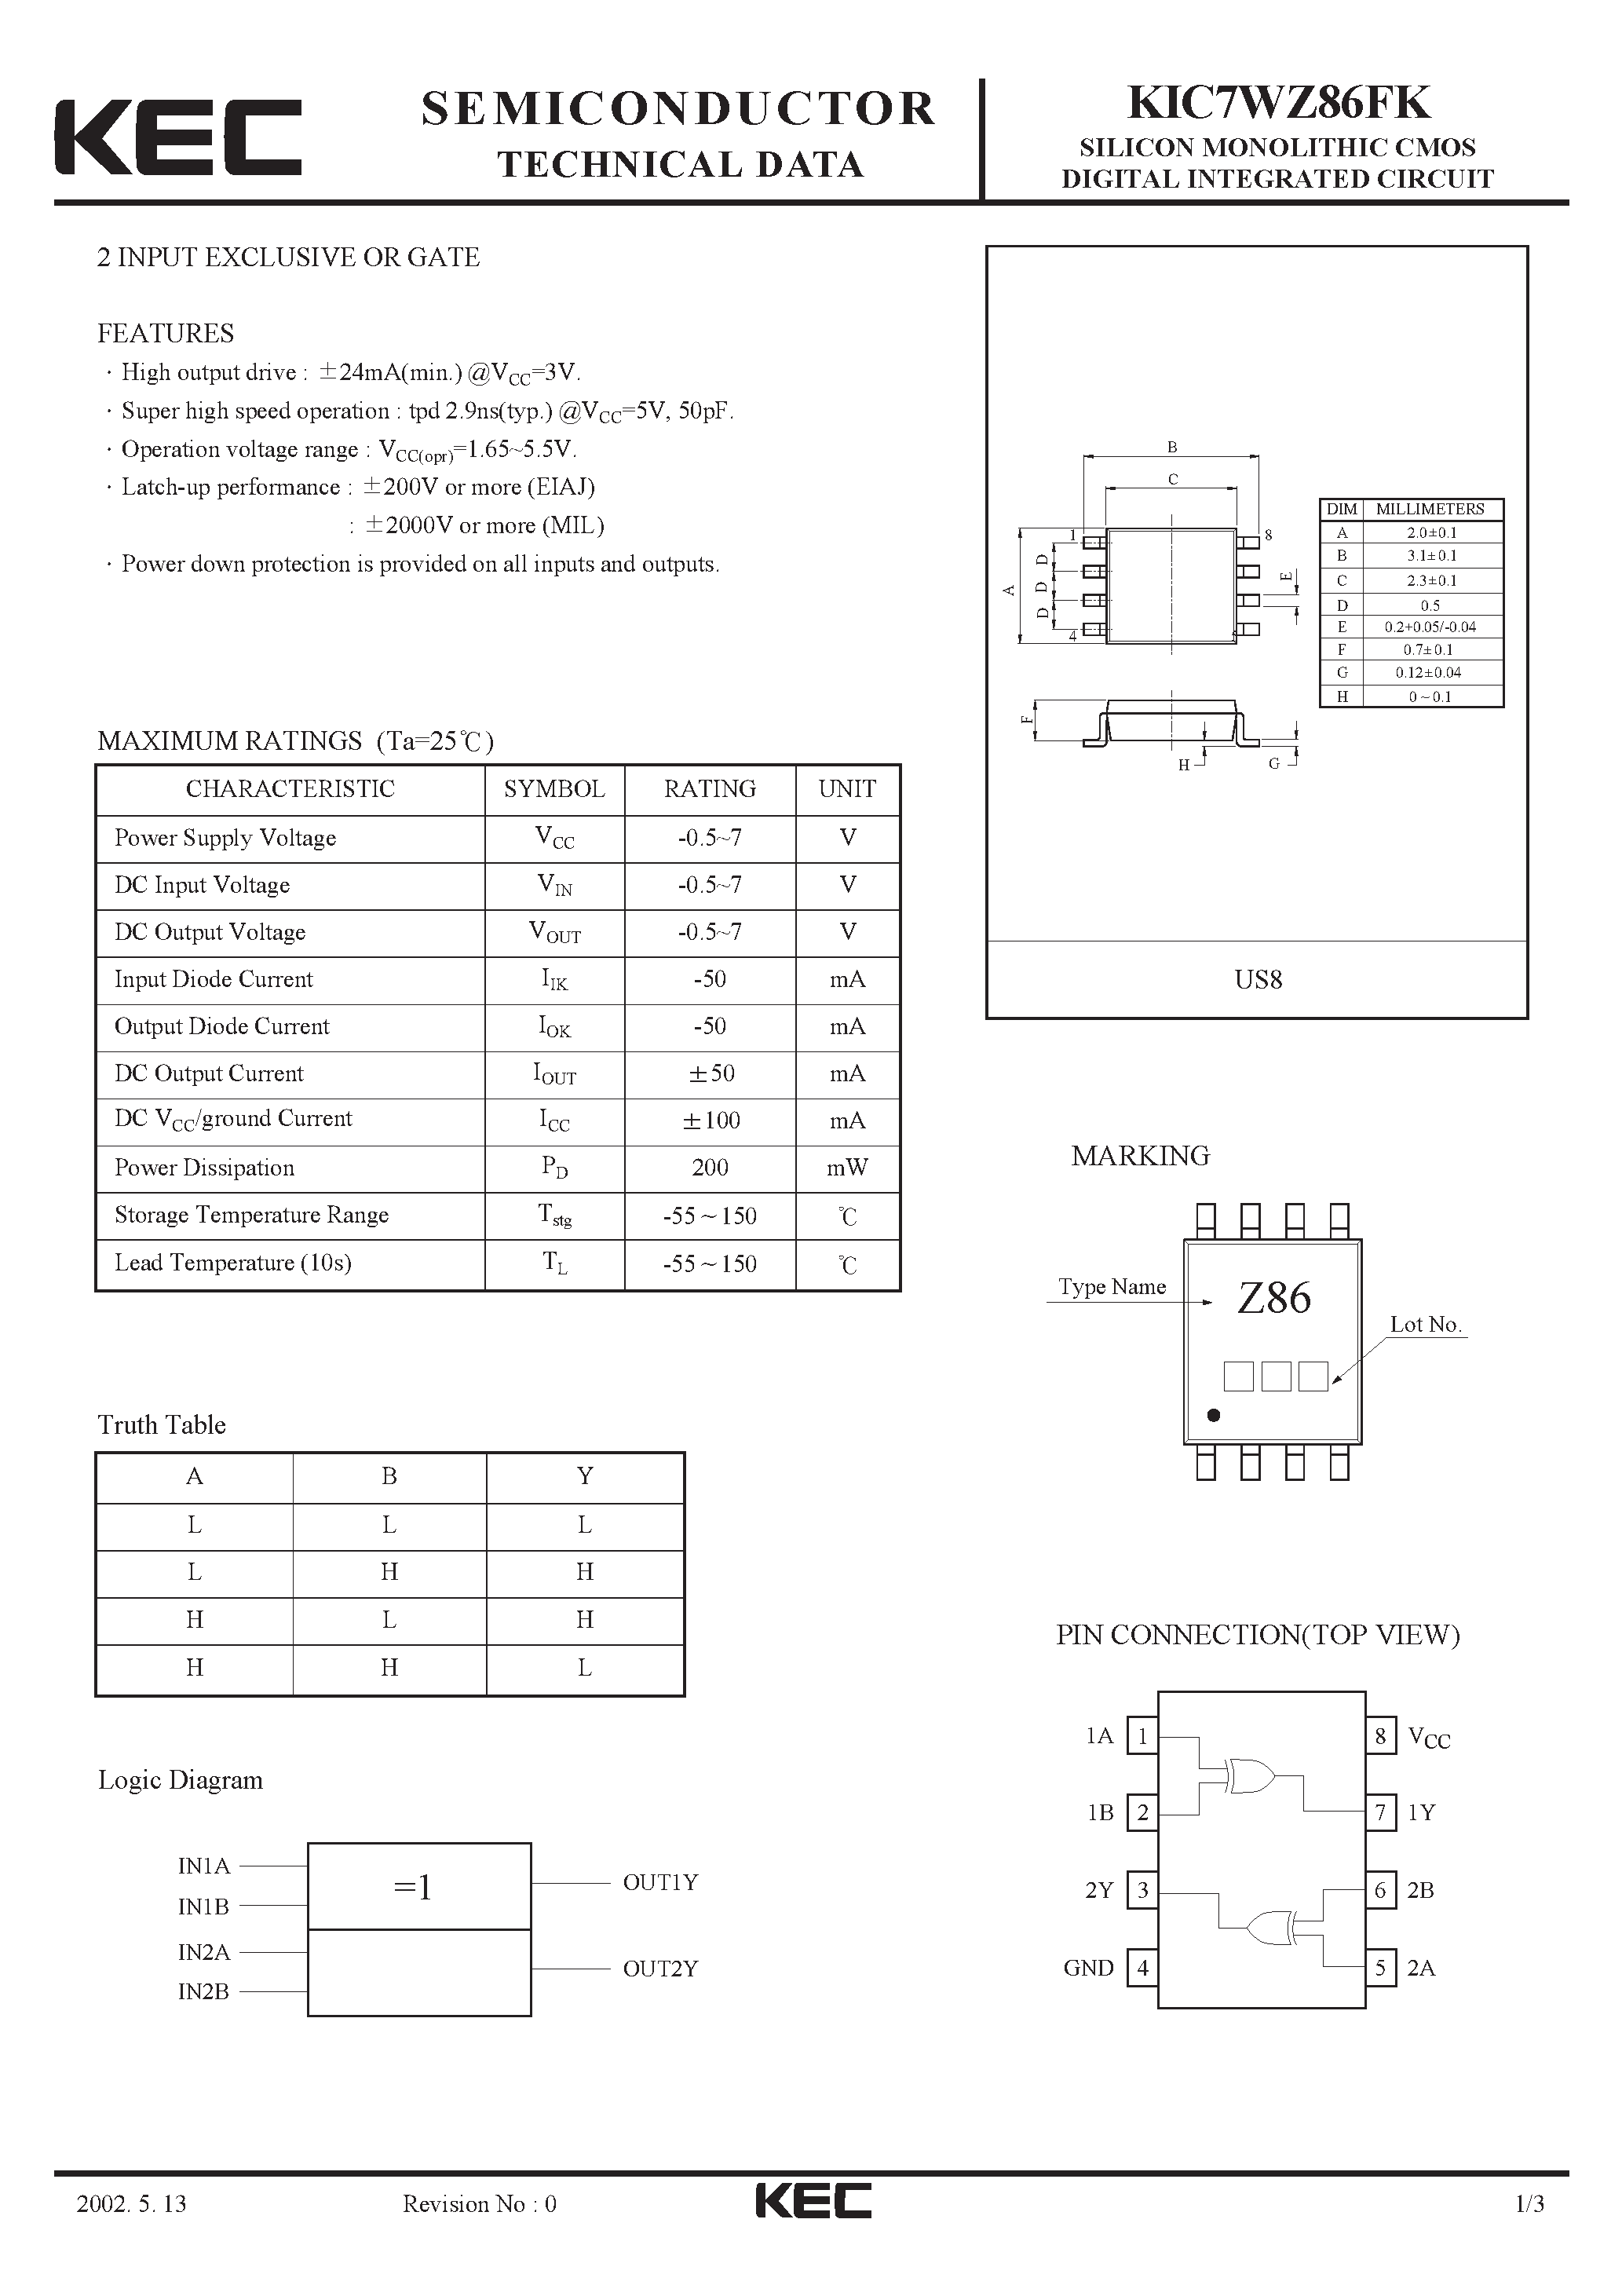 Datasheet KIC7WZ86FK - SILICON MONOLITHIC CMOS DIGITAL INTEGRATED CIRCUIT(2-INPUT EXCLUSIVE OR GATE) page 1